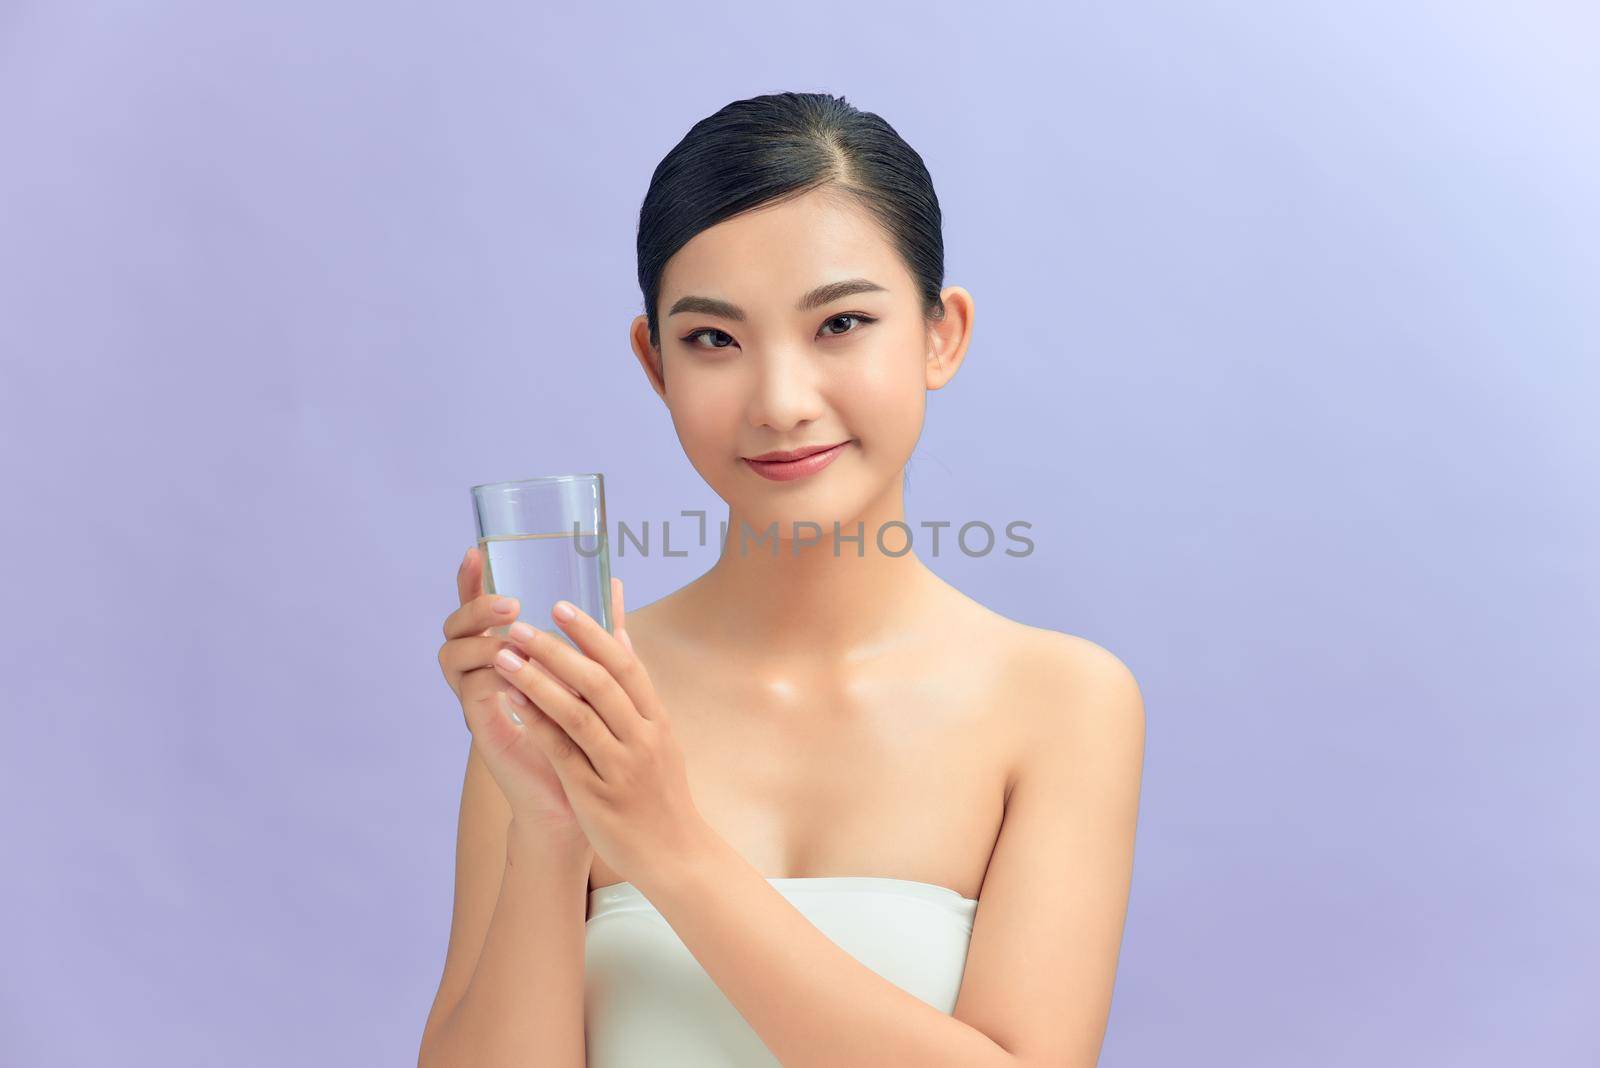 Young beautiful woman drinking water from glass. Isolated on white background